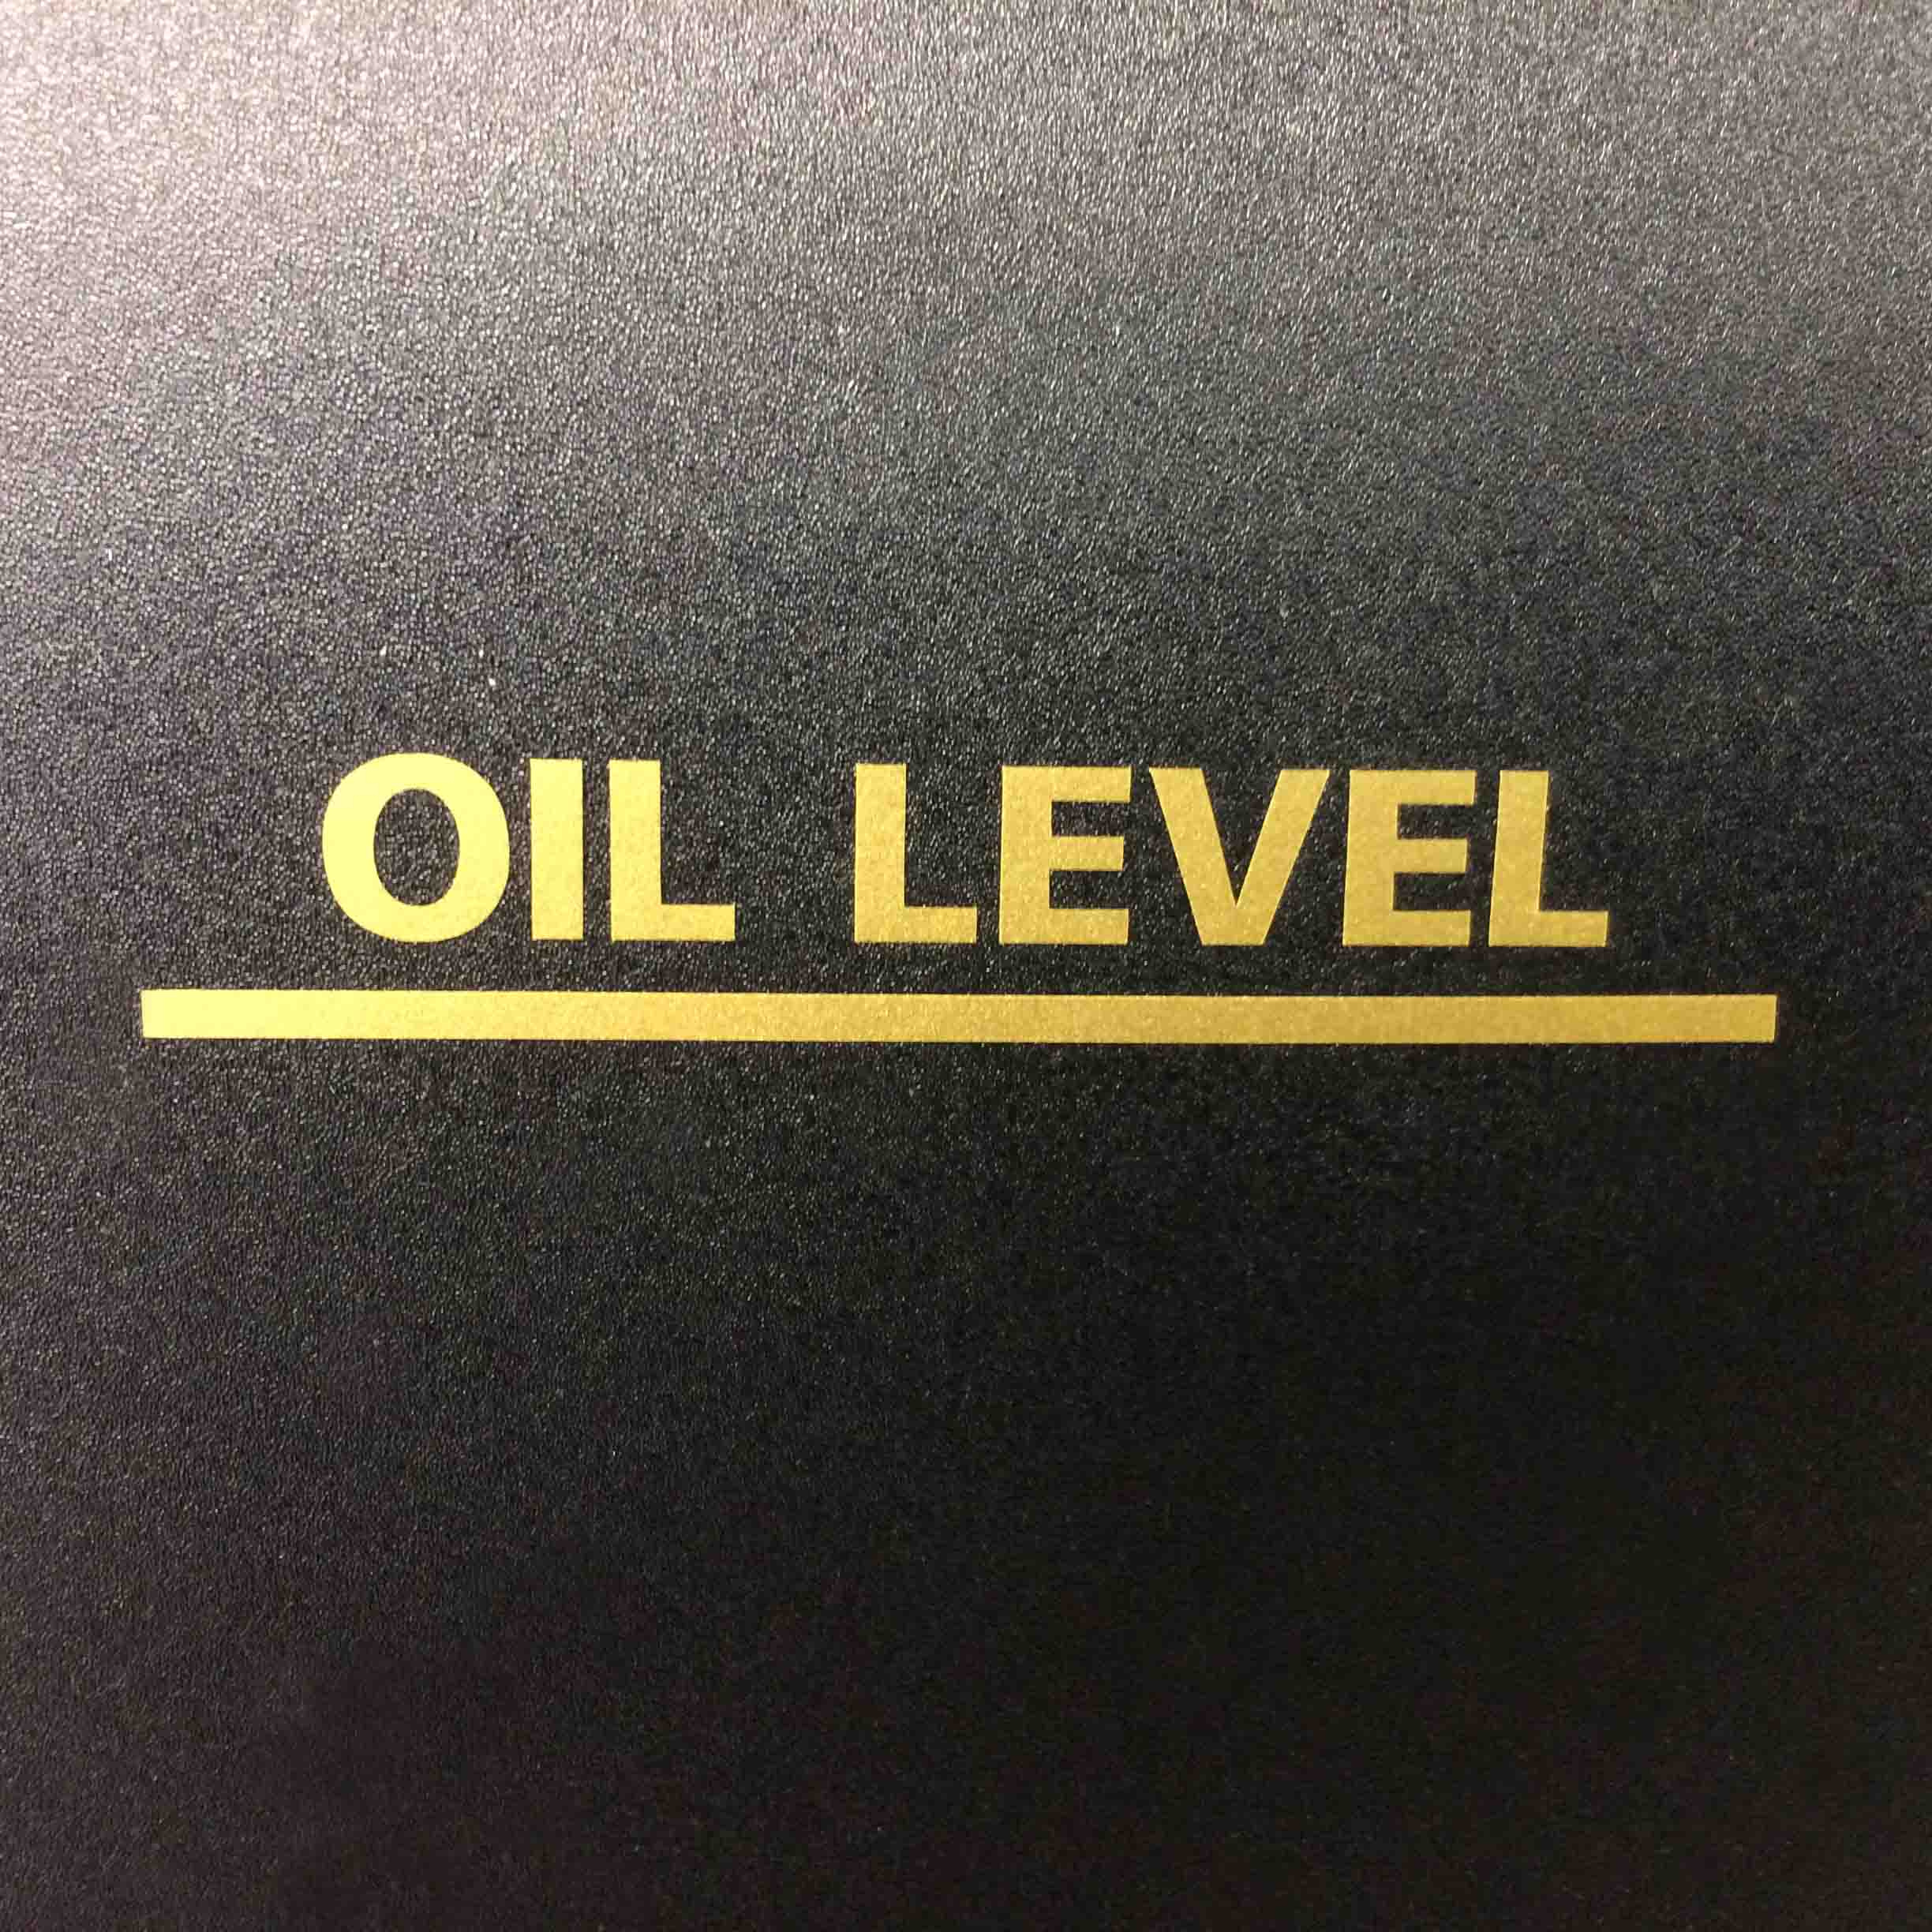 OIL LEVEL MARKER STICKER. Oil Level gold lettering and underlined in gold.